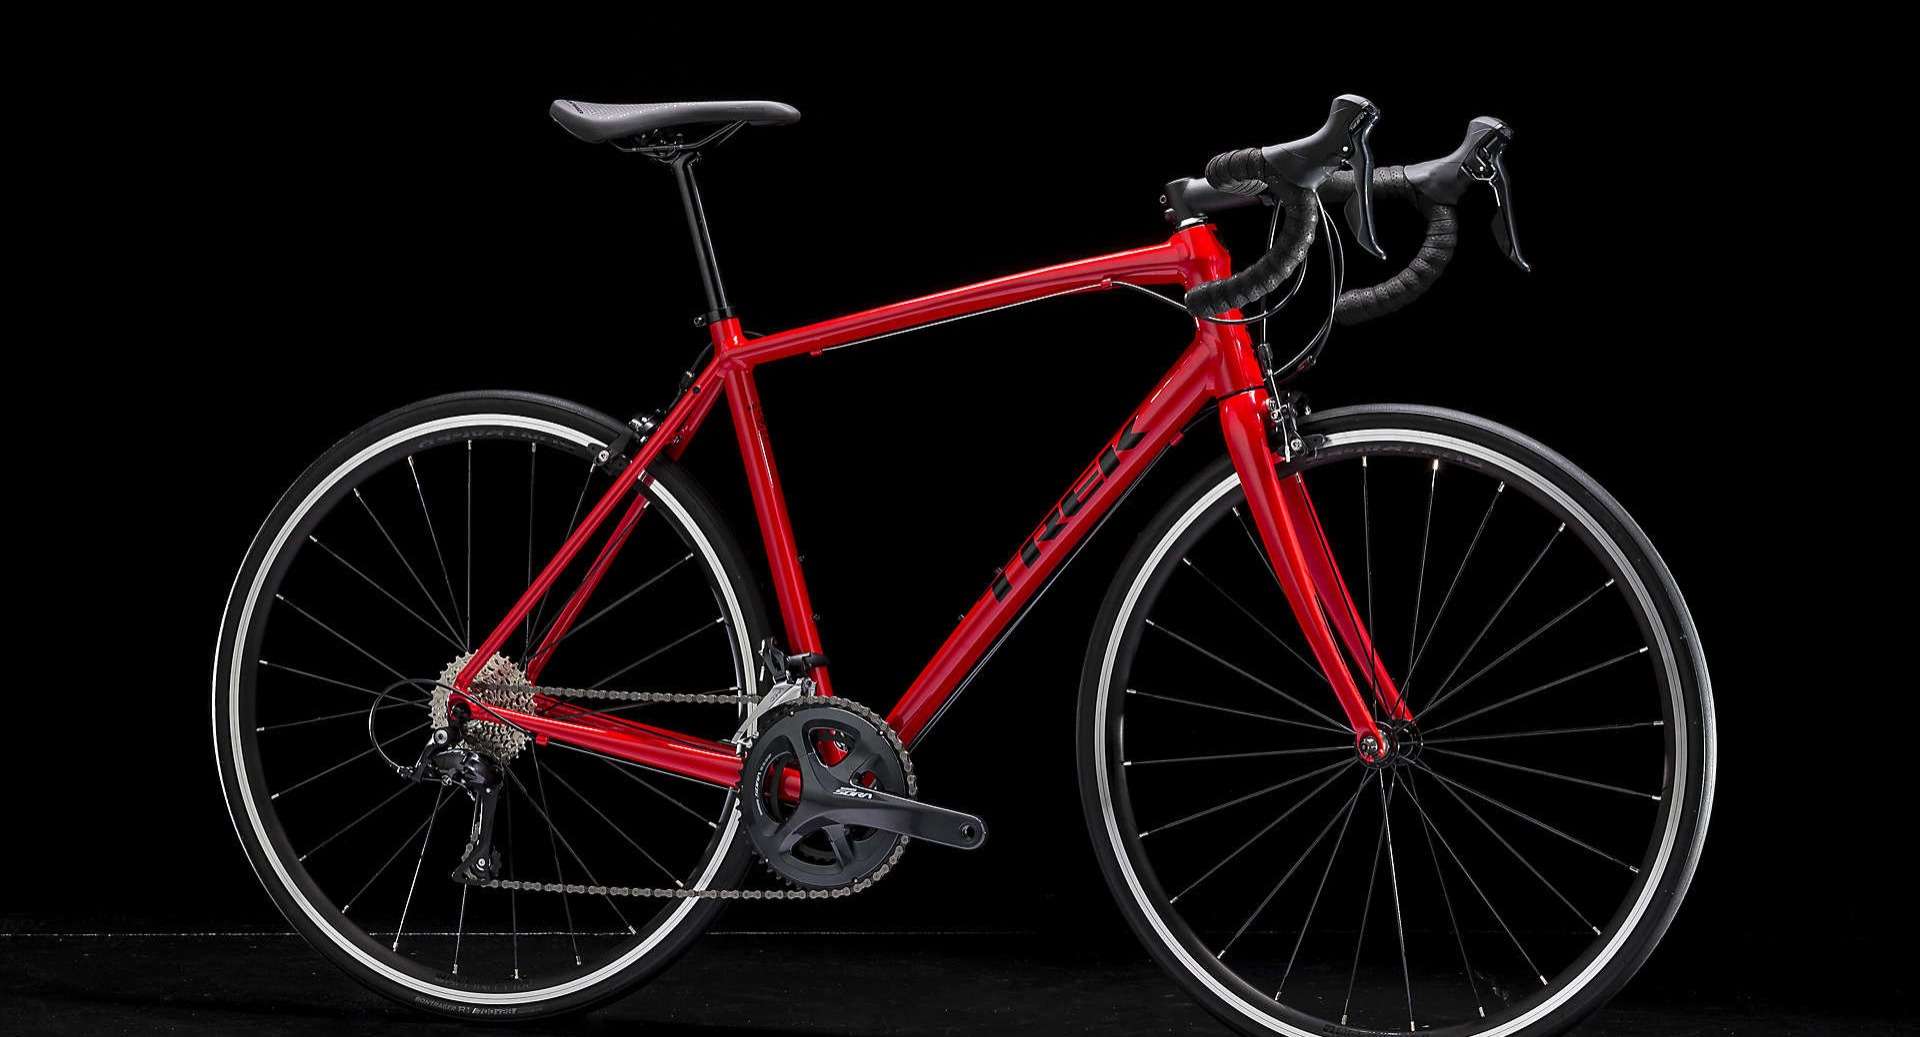 The Best Road Bikes Under $1000 - Our 